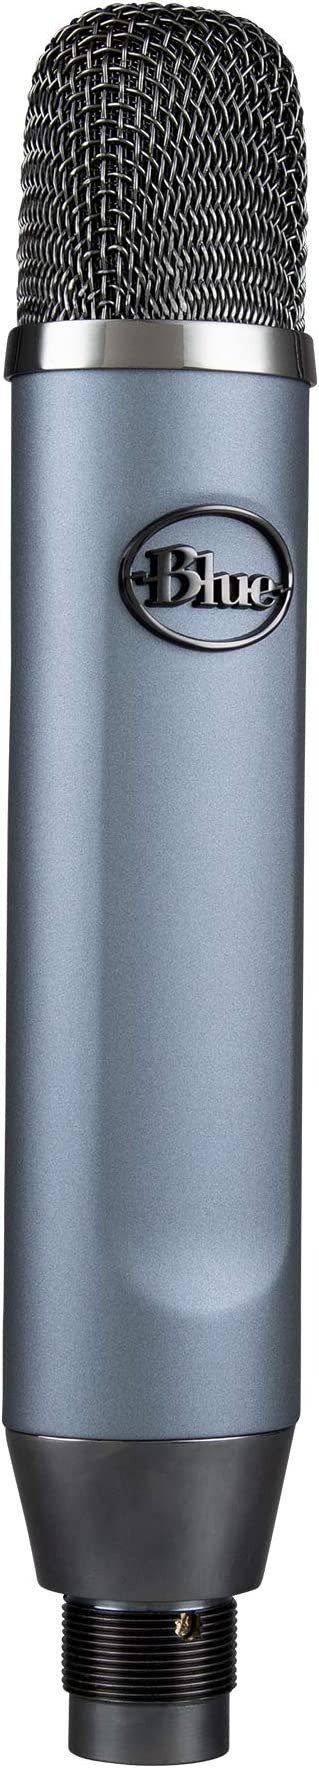 Logitech for Creators Blue Ember XLR Condensor Microphone for Studio, Recording, Podcast, Streaming Mic